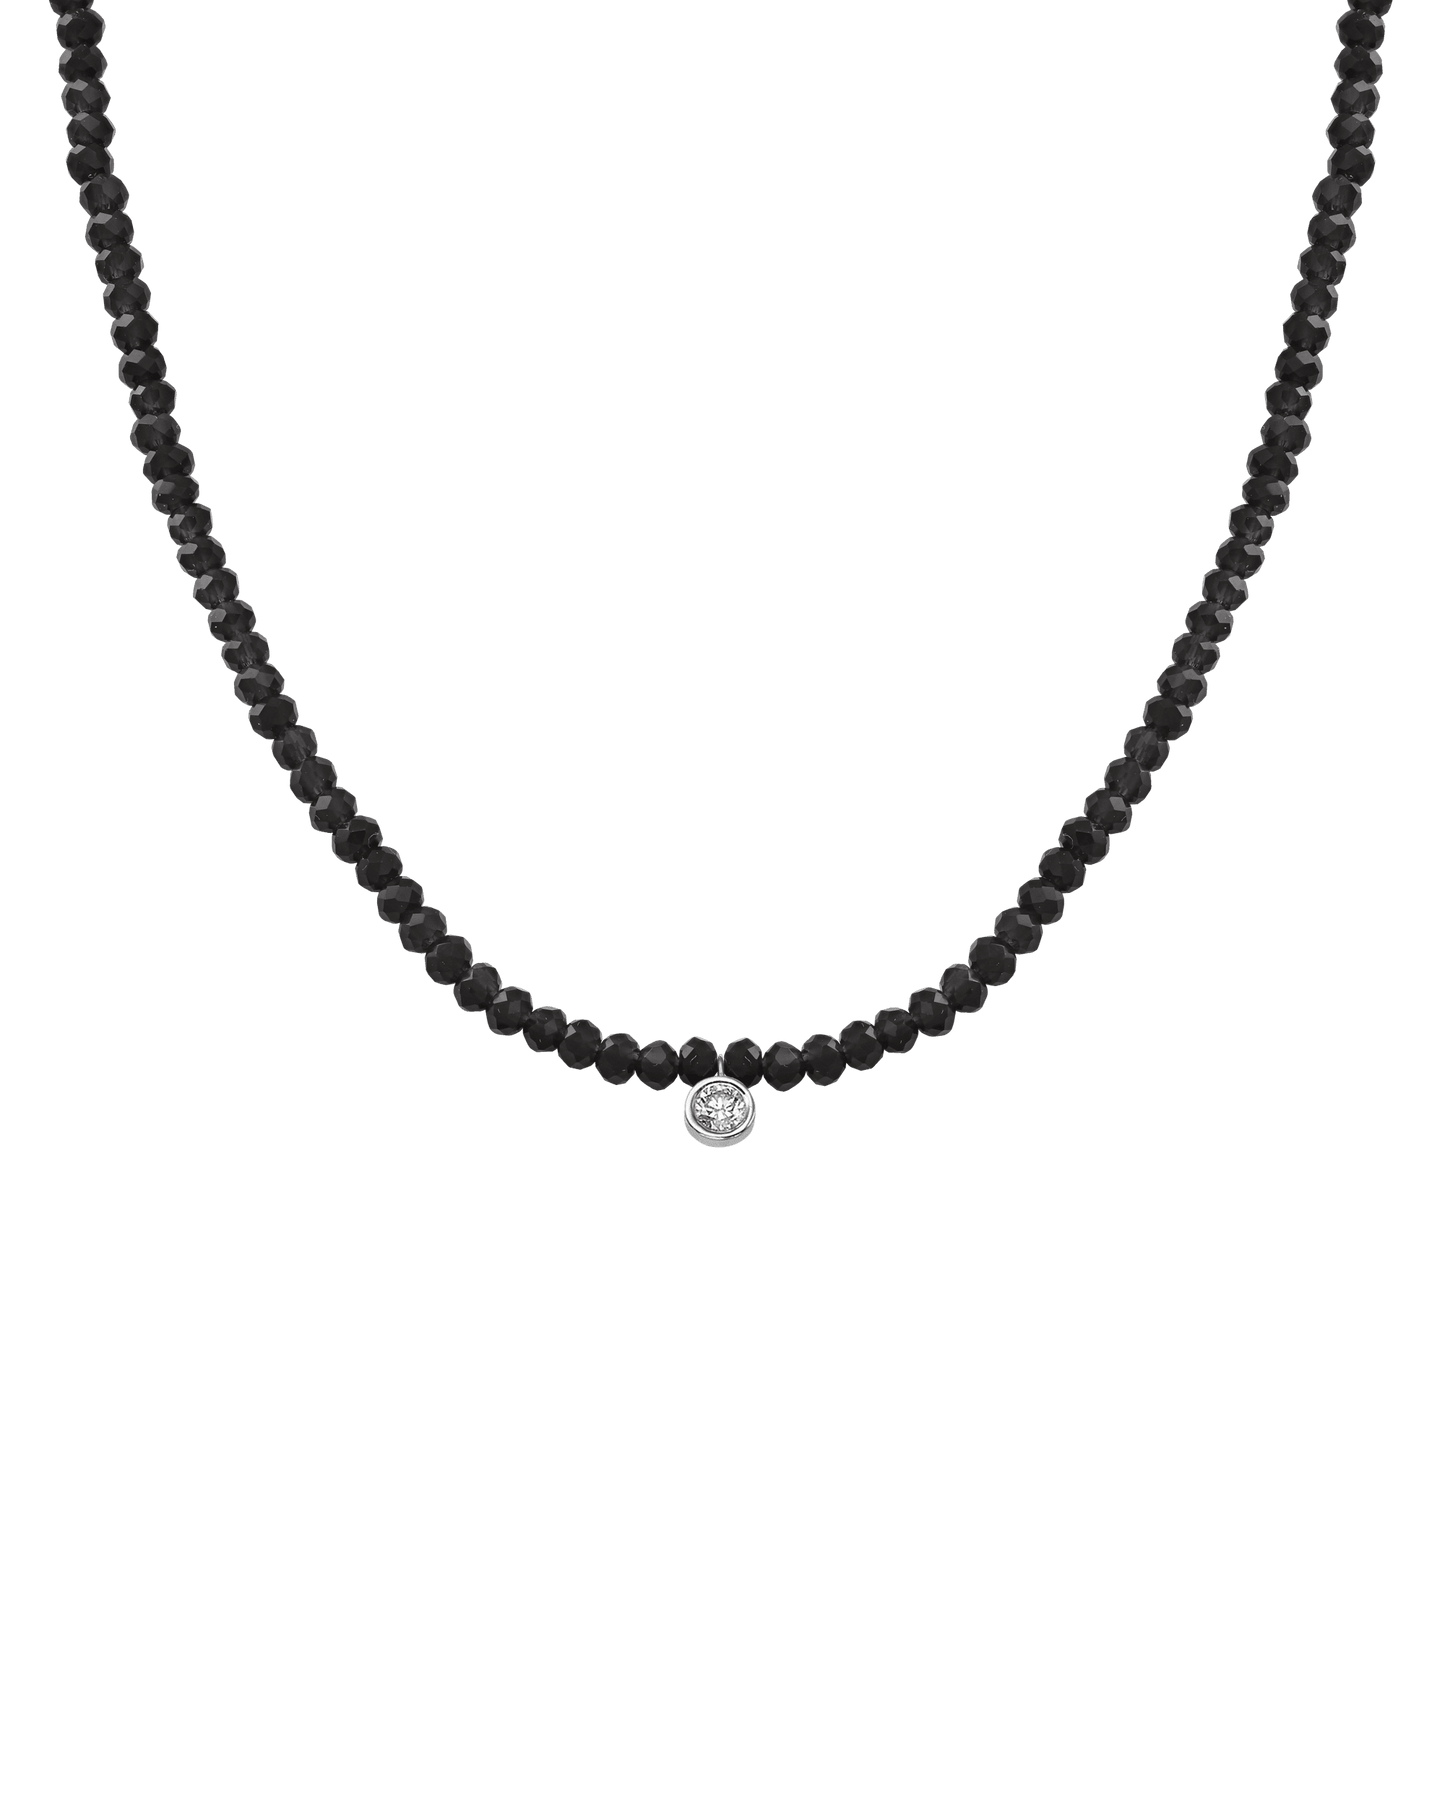 The Gemstone & Diamond Necklace - 14K White Gold Necklaces 14K Solid Gold Glass Beads Black Spinnel Large: 0.1ct 14"